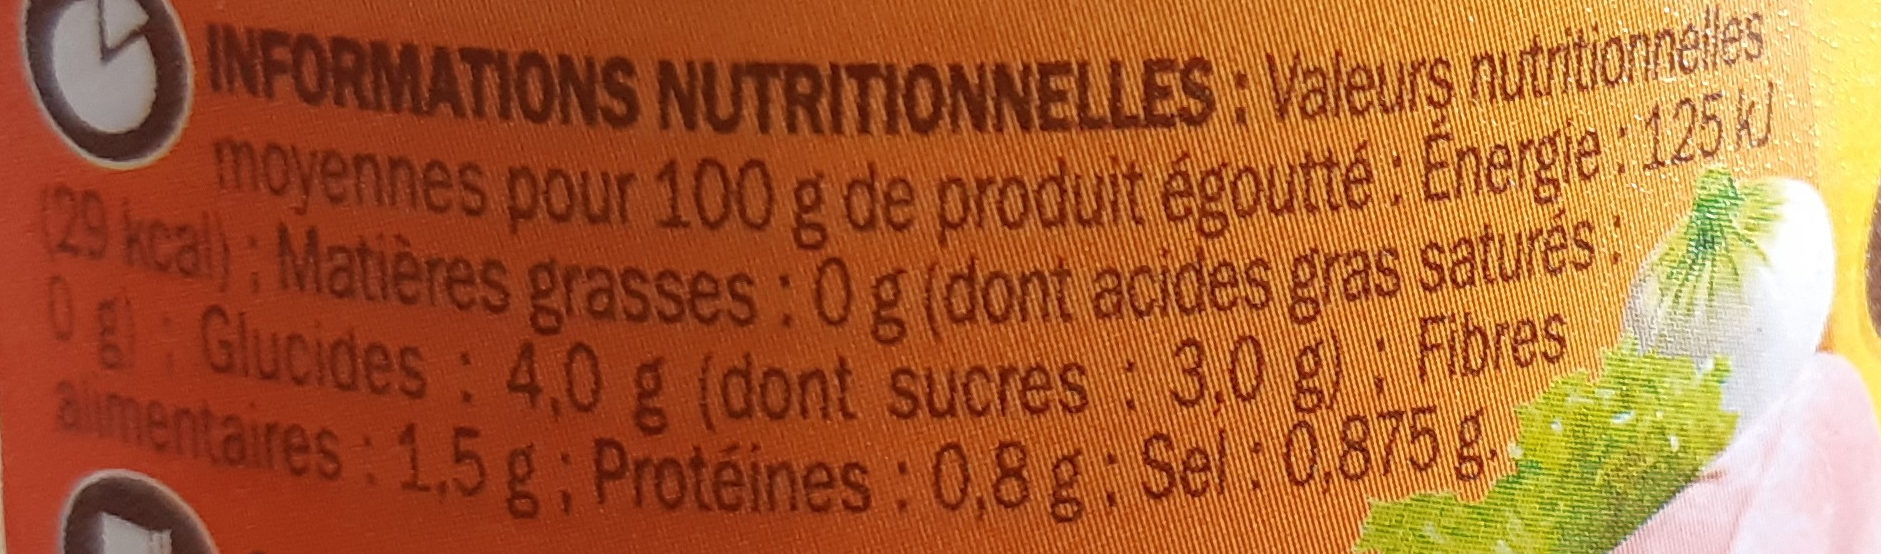 Petits oignons - Nutrition facts - fr